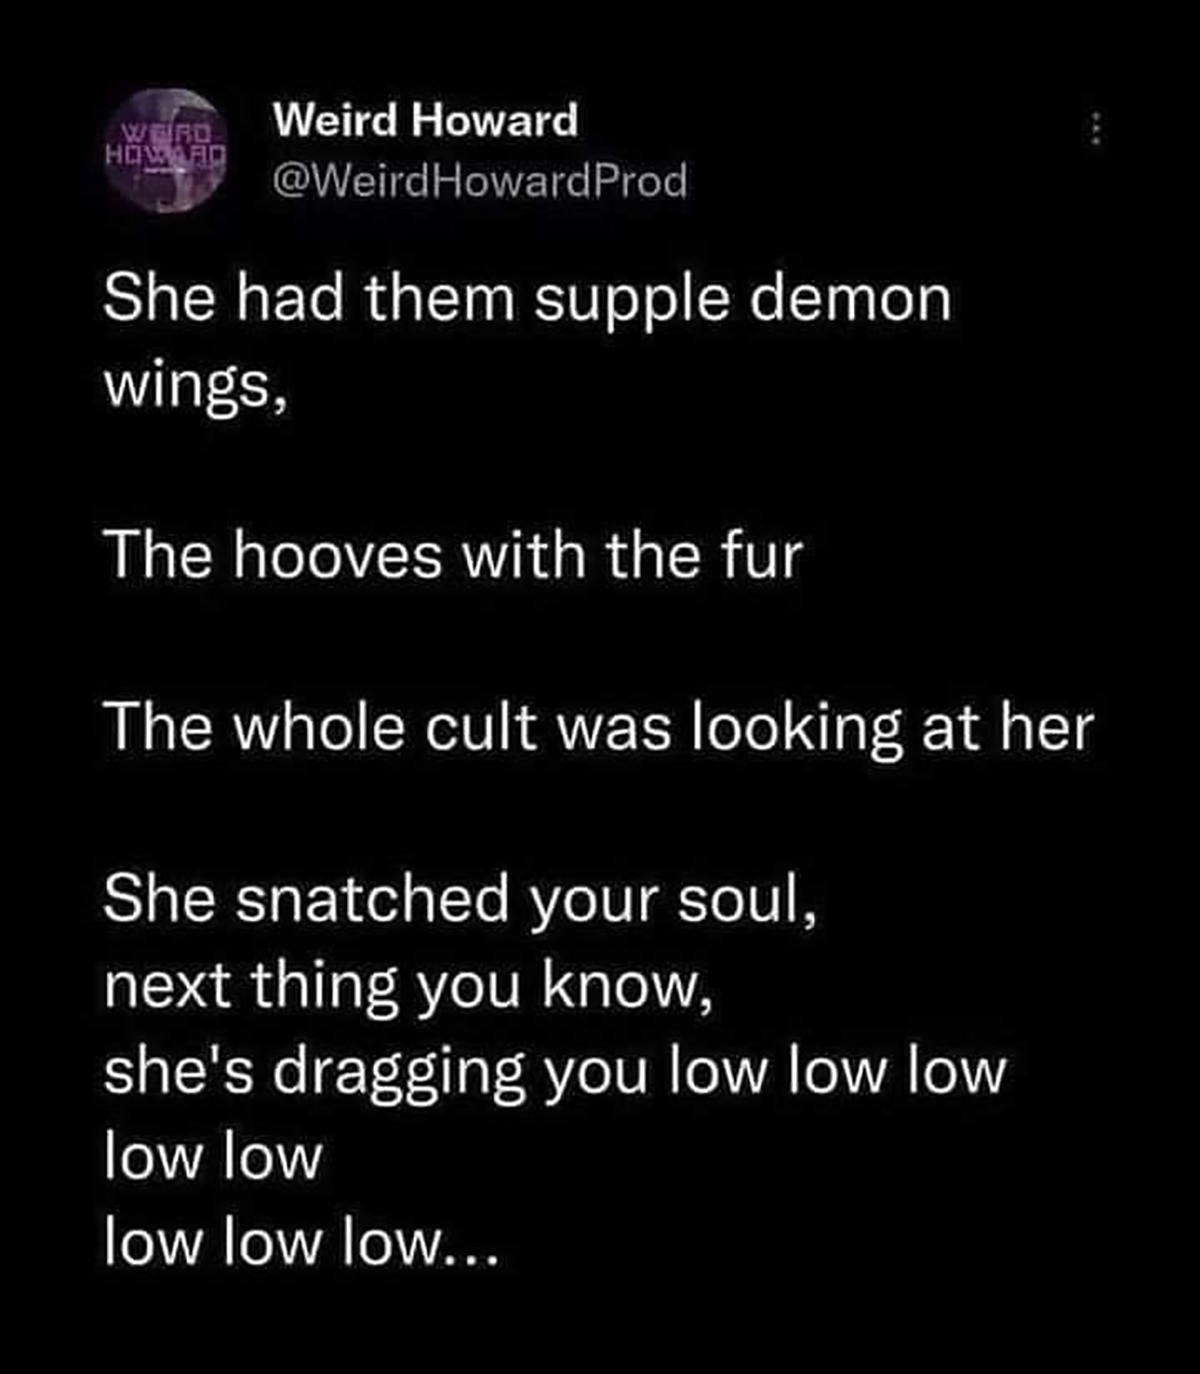 atmosphere - Werd Howard Weird Howard Prod She had them supple demon wings, The hooves with the fur The whole cult was looking at her She snatched your soul, next thing you know, she's dragging you low low low low low low low low...